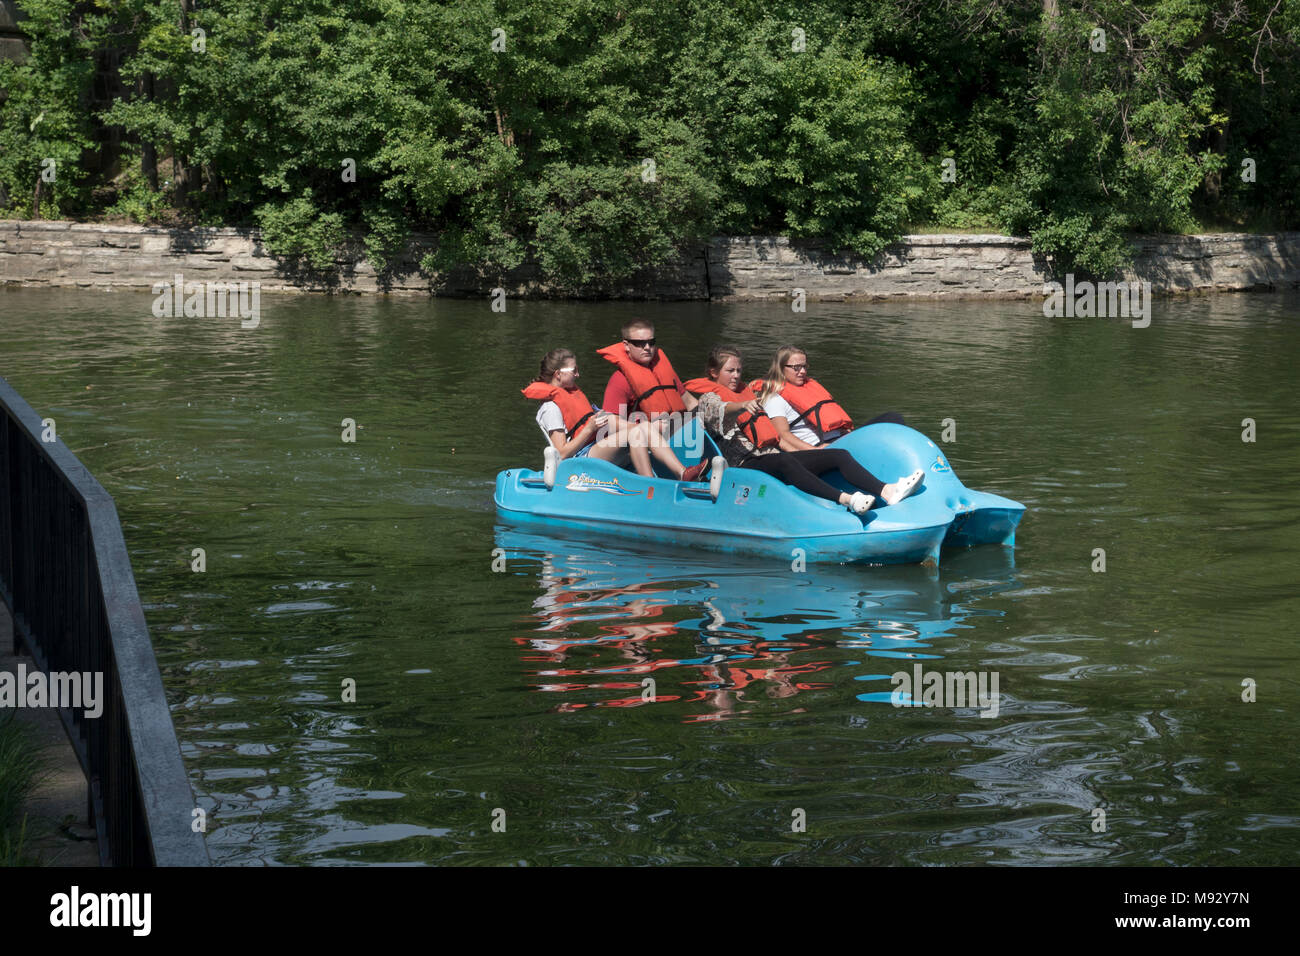 Teens entering Lake of the isles after passing thru the Lake Calhoun channel in a peddle boat wearing life vests. Minneapolis Minnesota MN USA Stock Photo